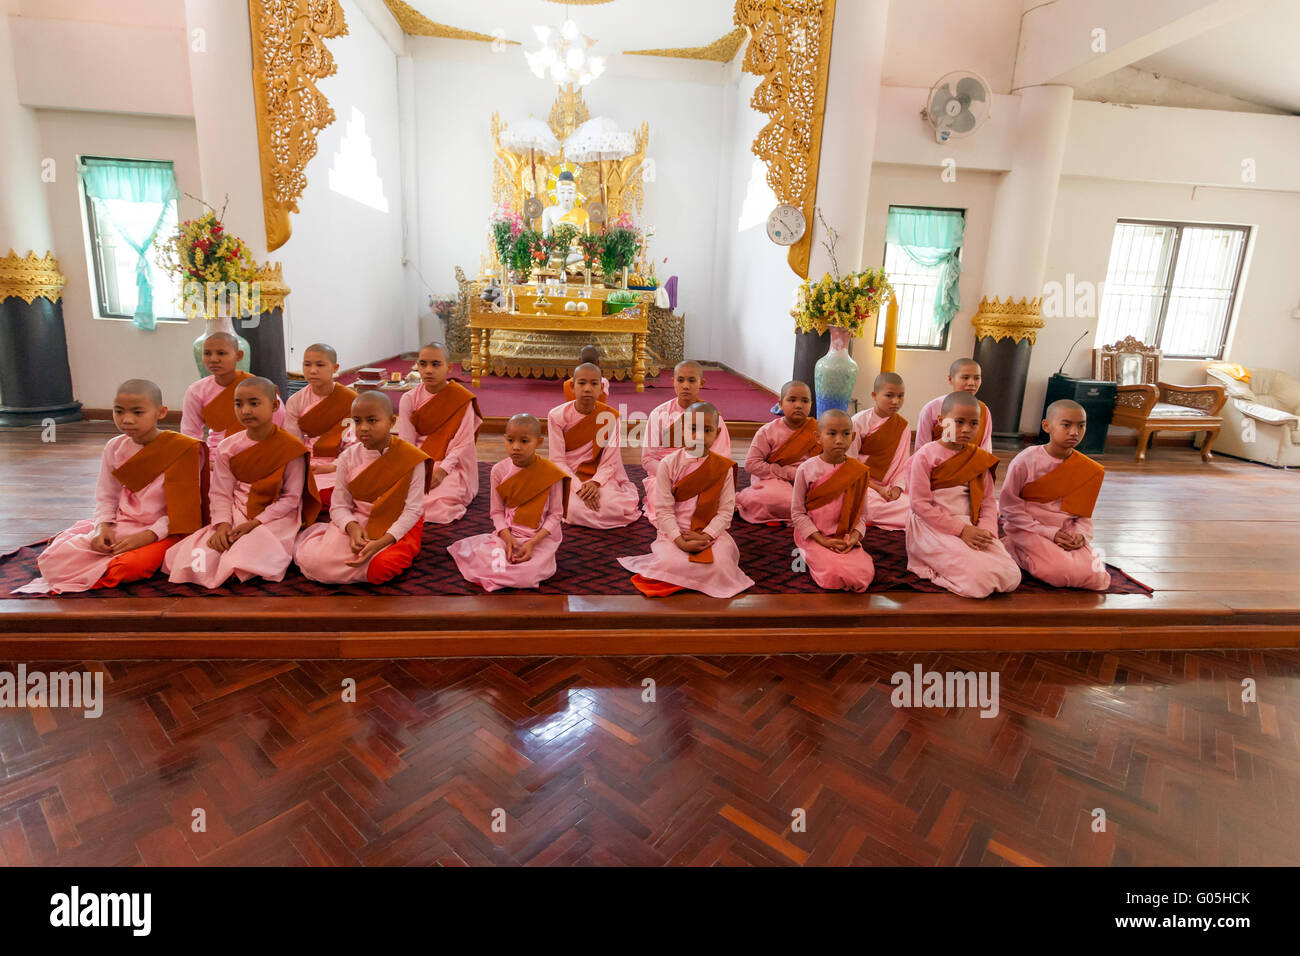 Young monks are trained at WAT JONG KHAM dates back to at least the 13th century - KENGTUNG also known as KYAINGTONG, MYANMAR Stock Photo